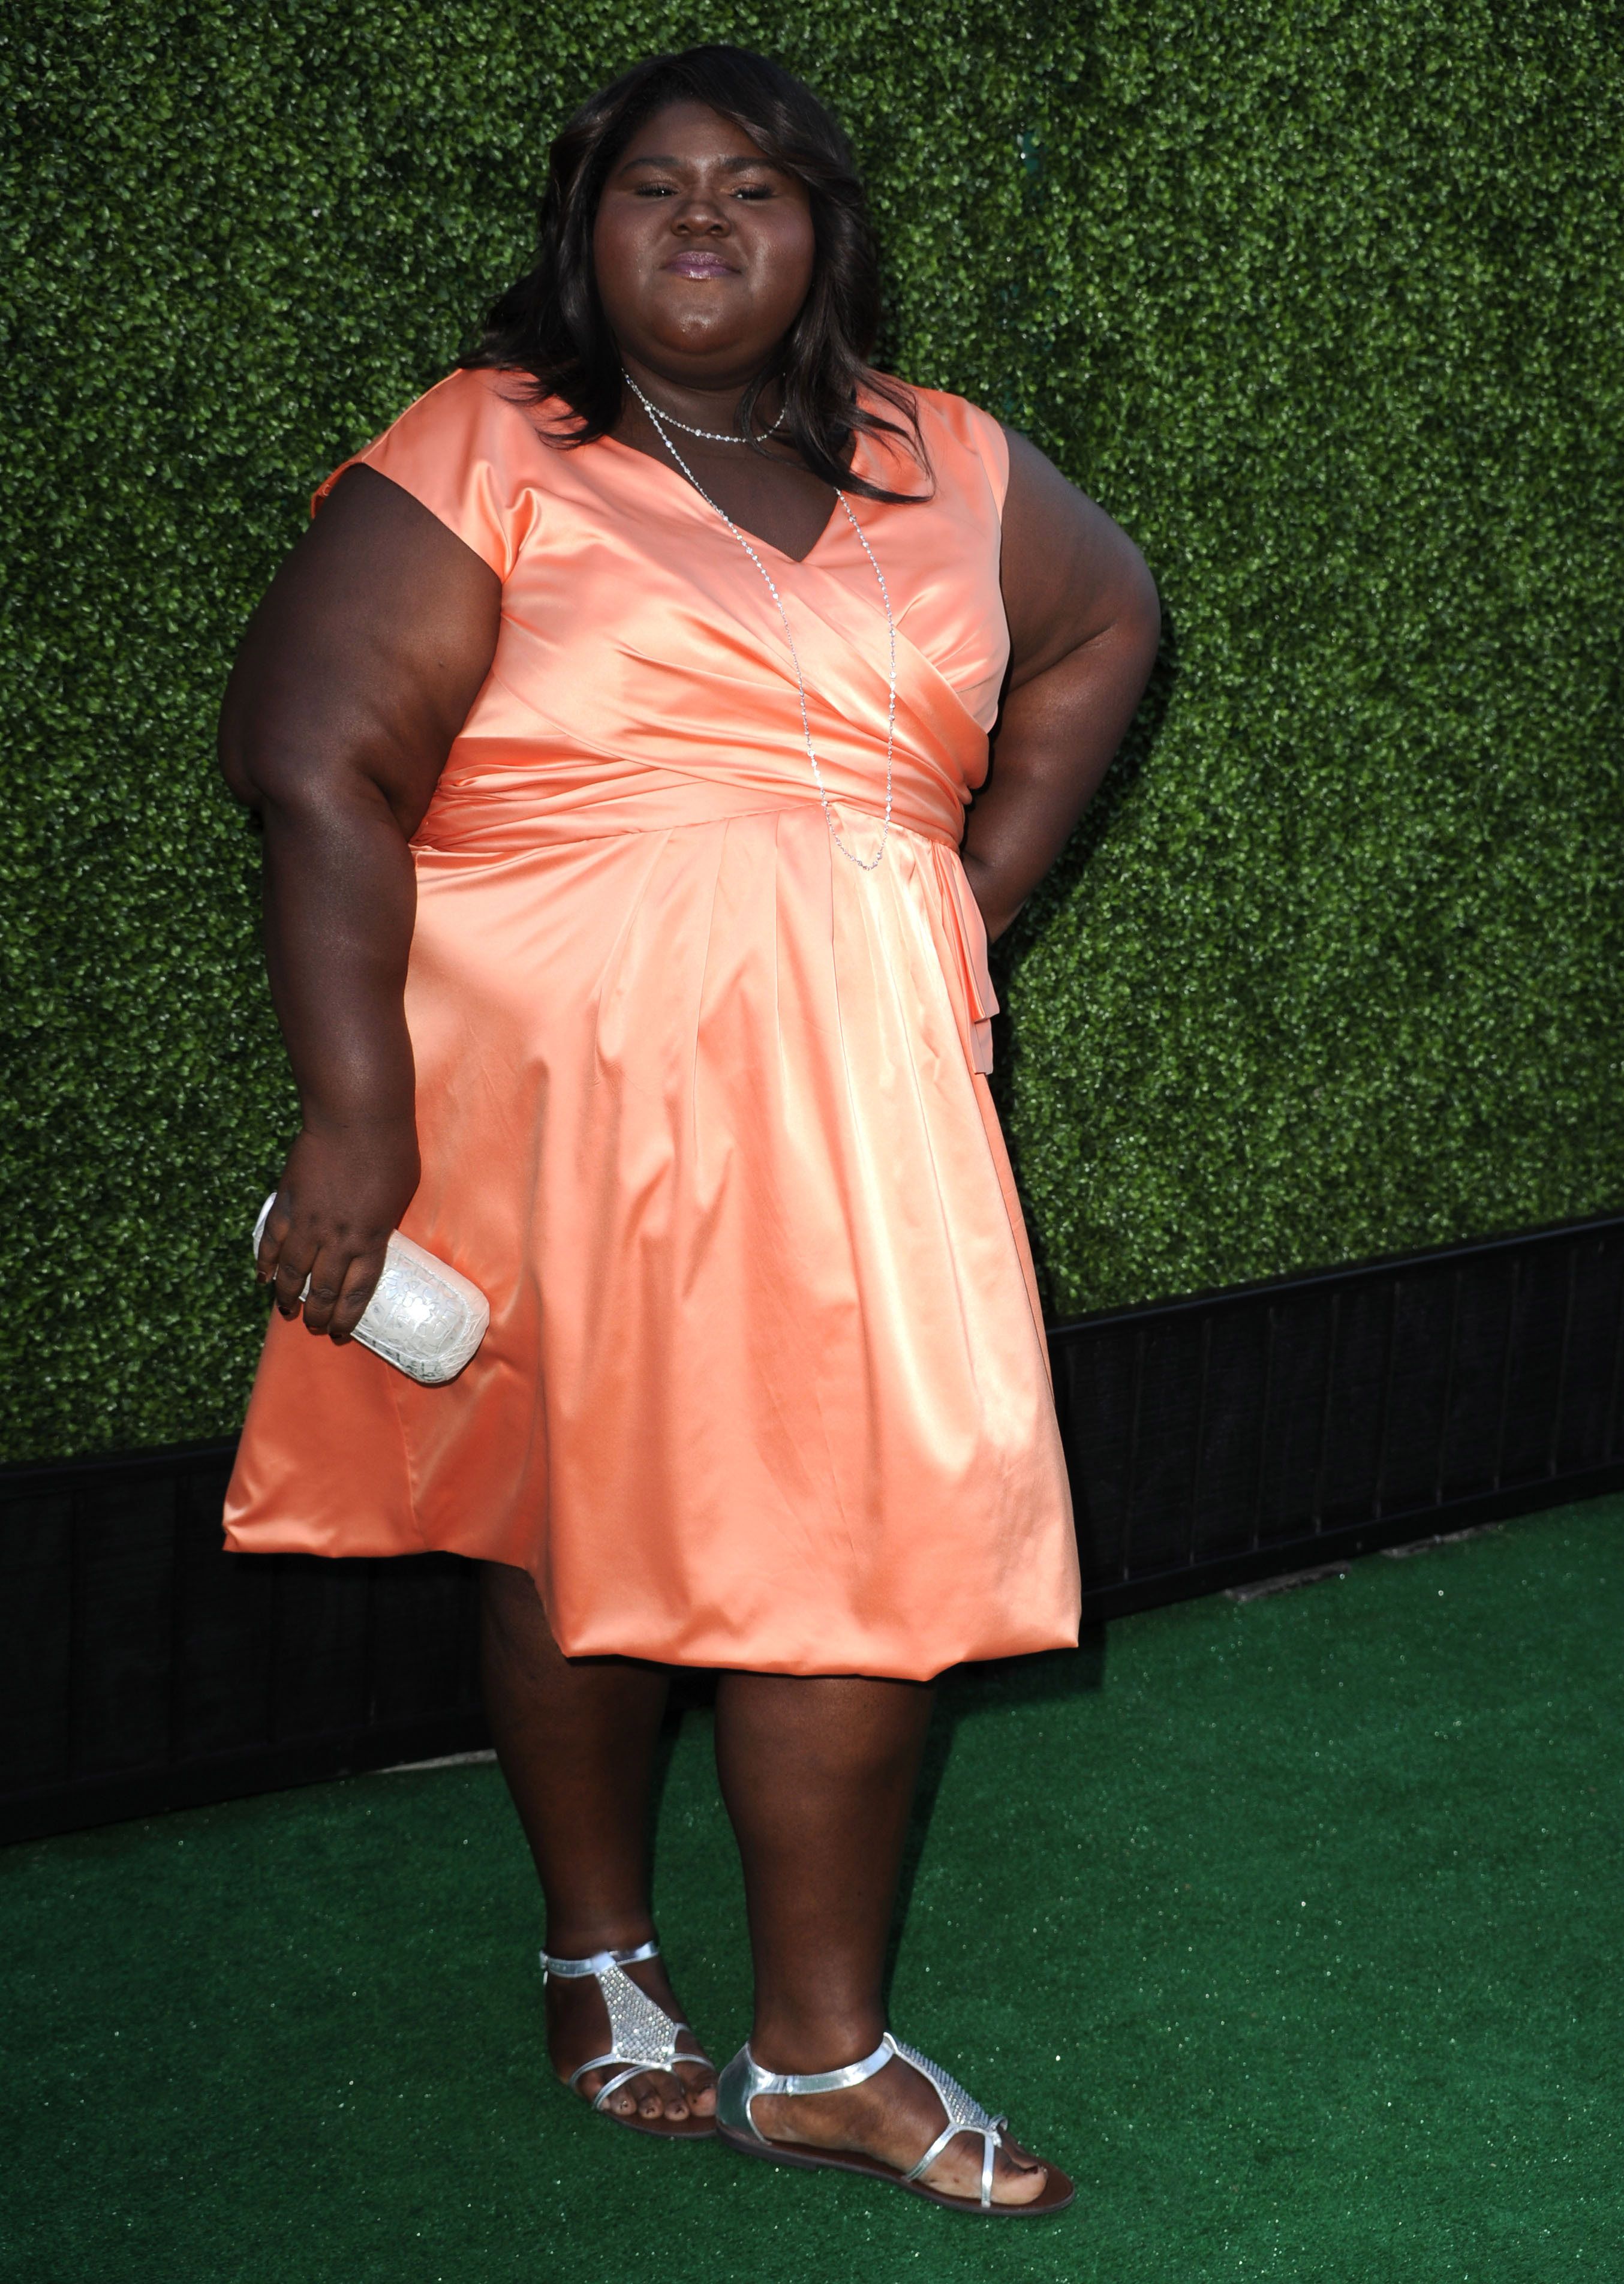 Gabourey Sidibe attends the 2010 CBS Summer Press Tour Party at The Tent on July 28, 2010 in Beverly Hills, California. | Source: Getty Images